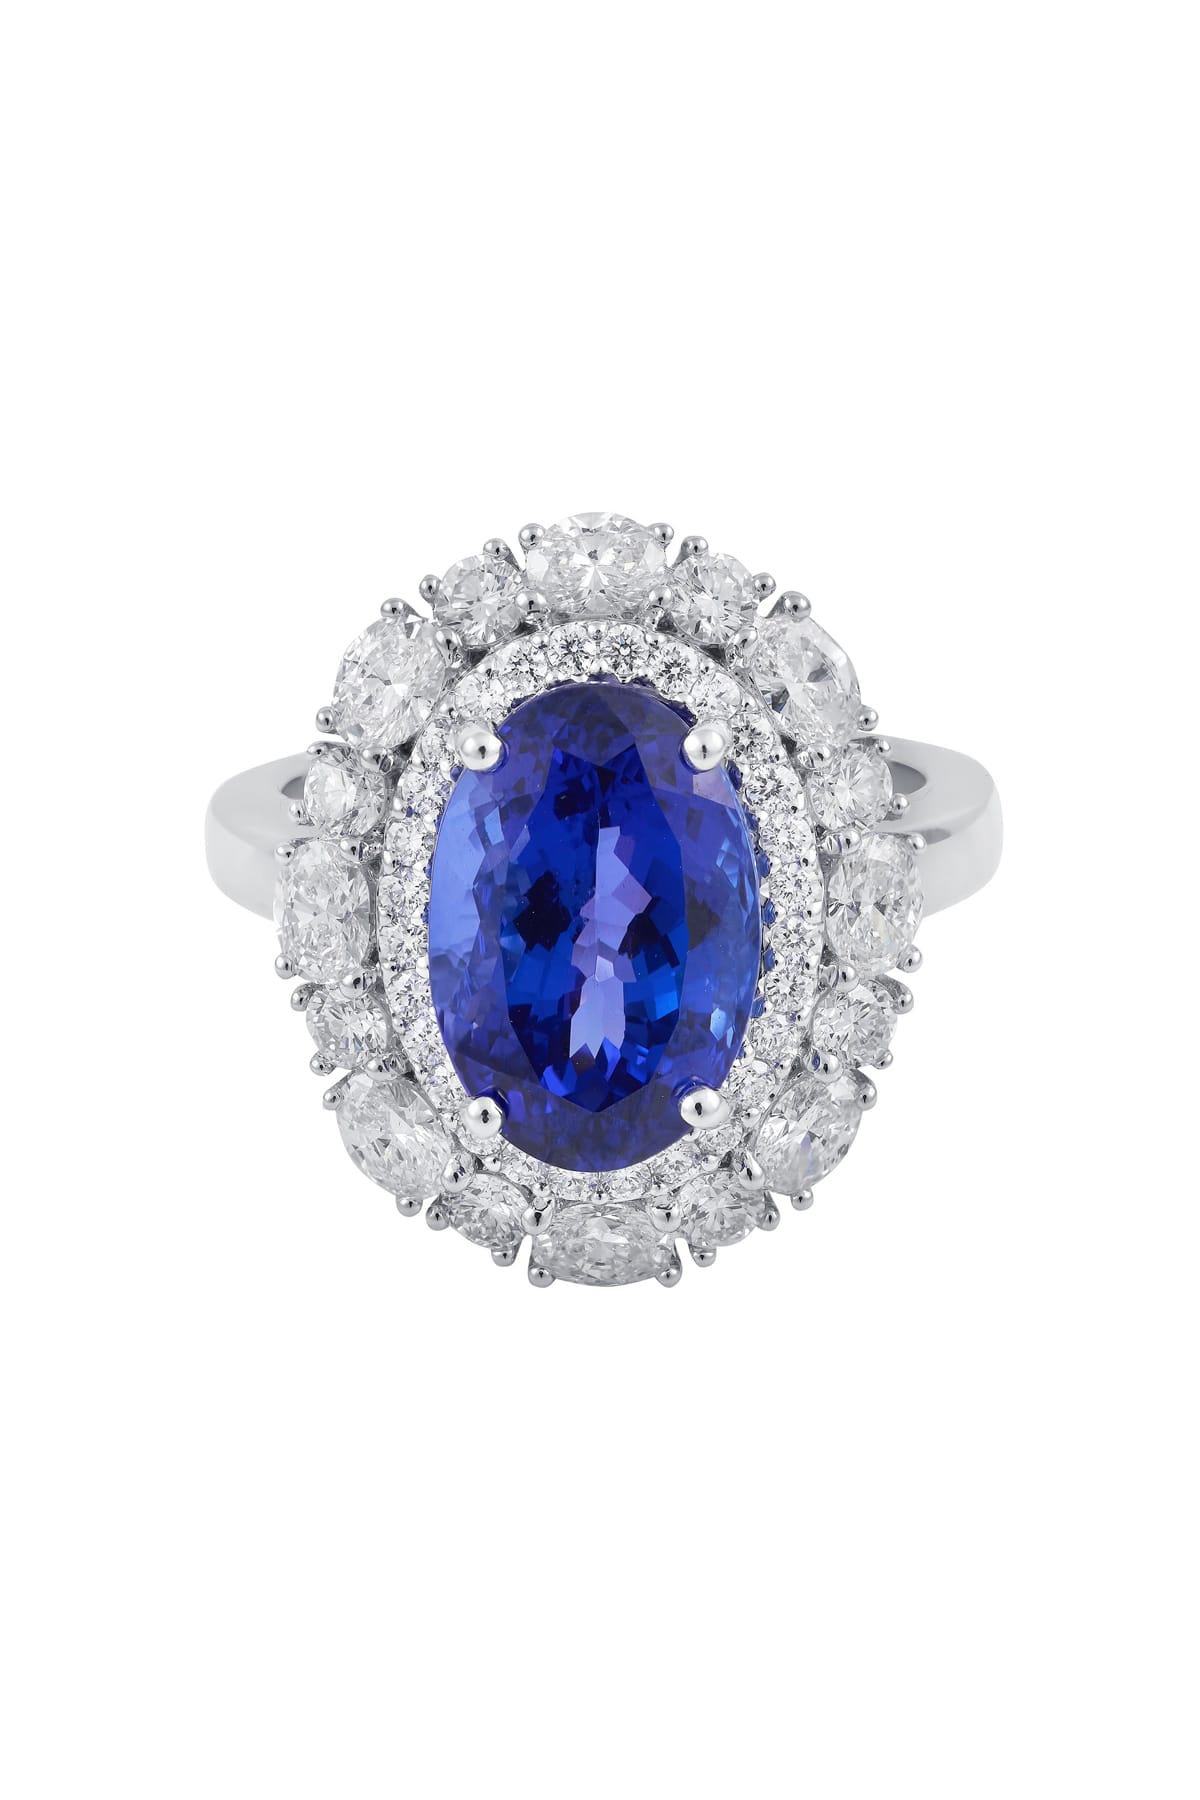 5.80ct Oval Tanzanite and Double Diamonds Halo Ring set in 18ct White Gold available at LeGassick Diamonds and Jewellery Gold Coast, Australia.